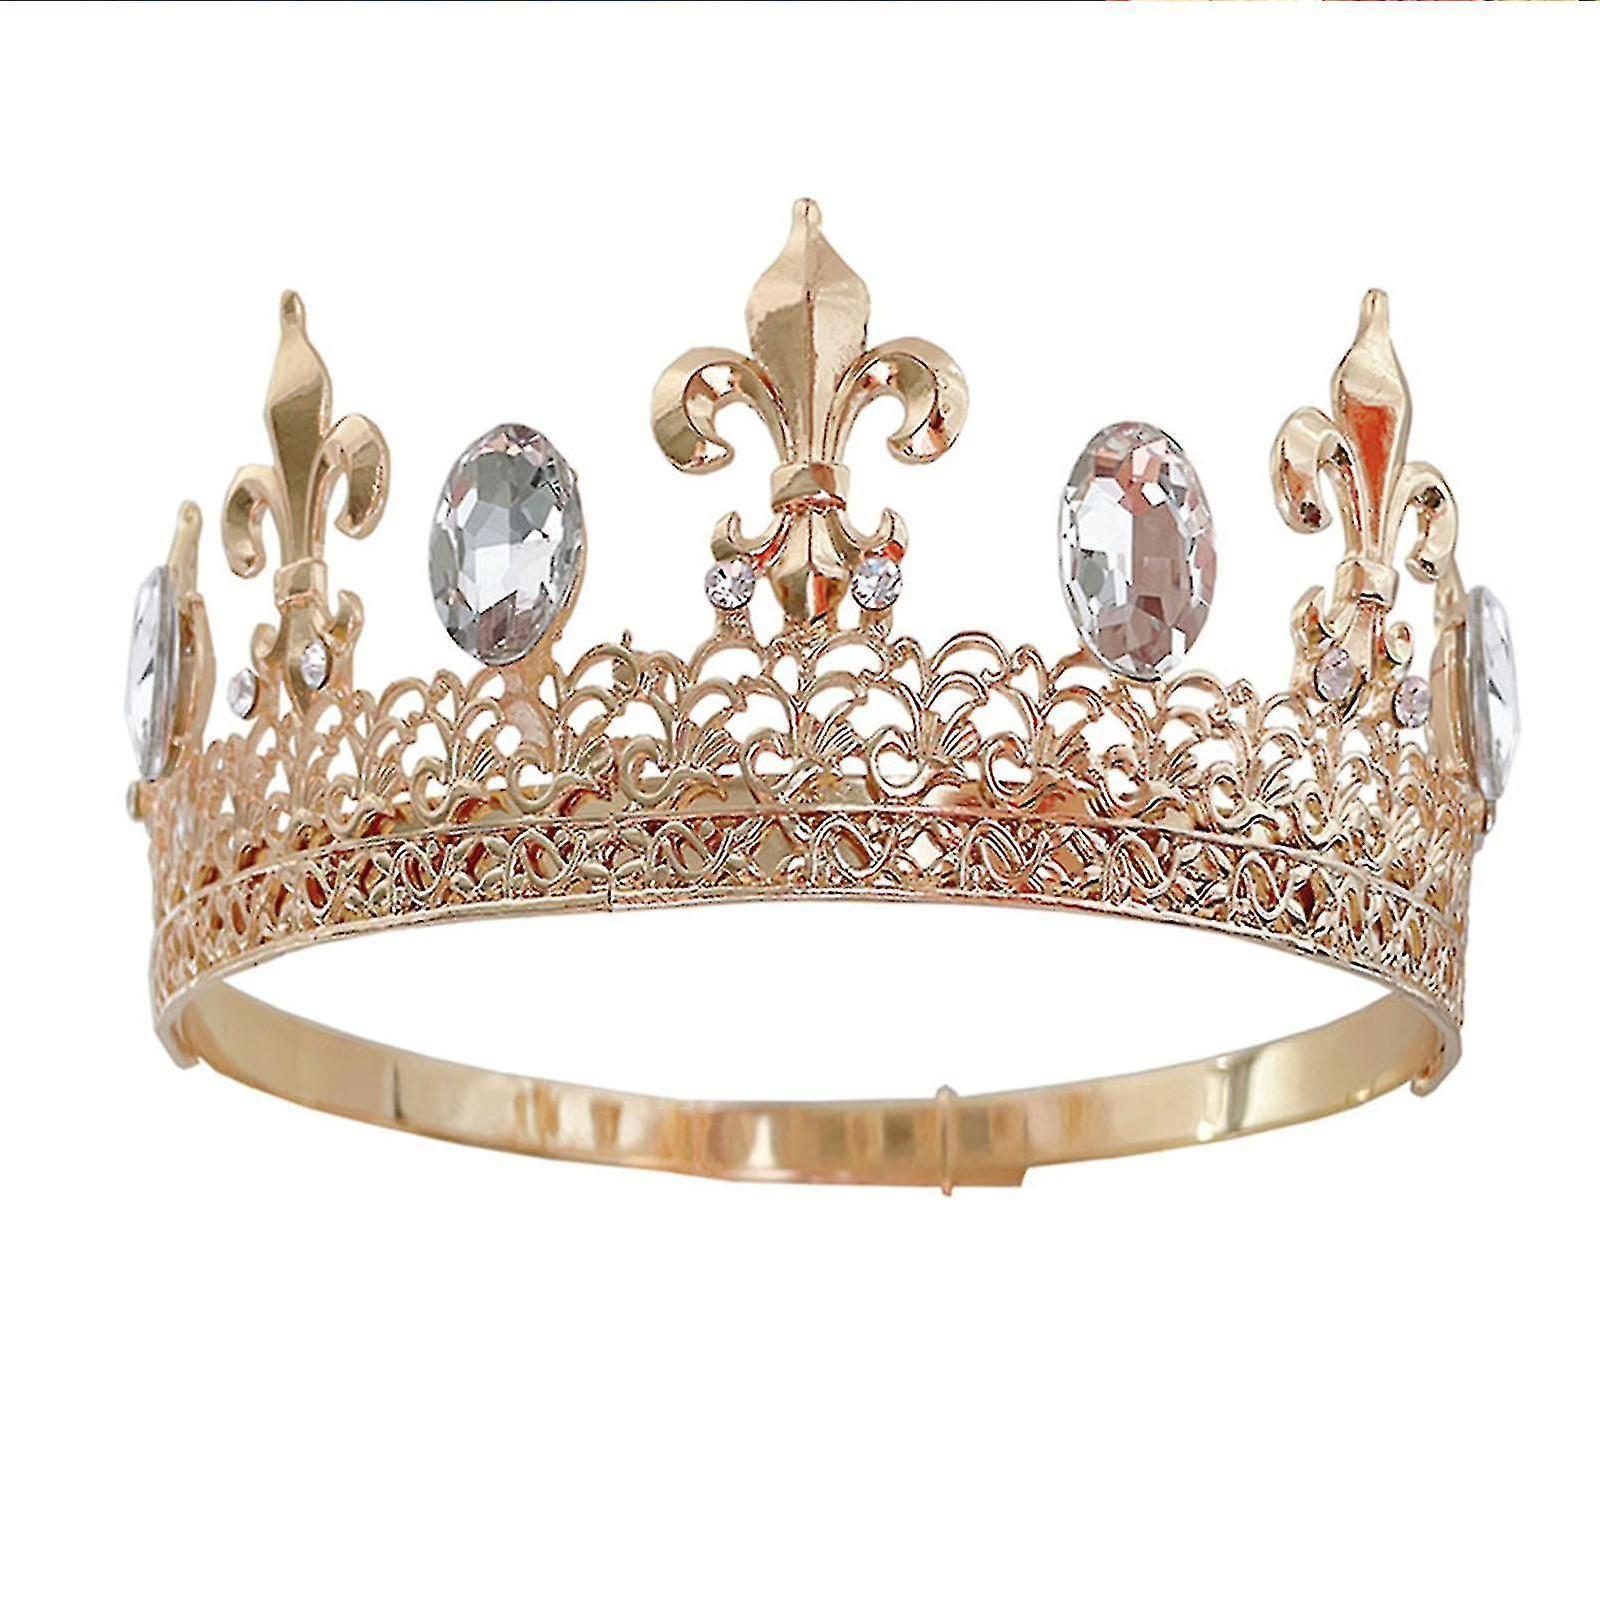 Beauty Pageant Crown Queen-tiara Bar Show Jewelry Proposal Gift With Buckle